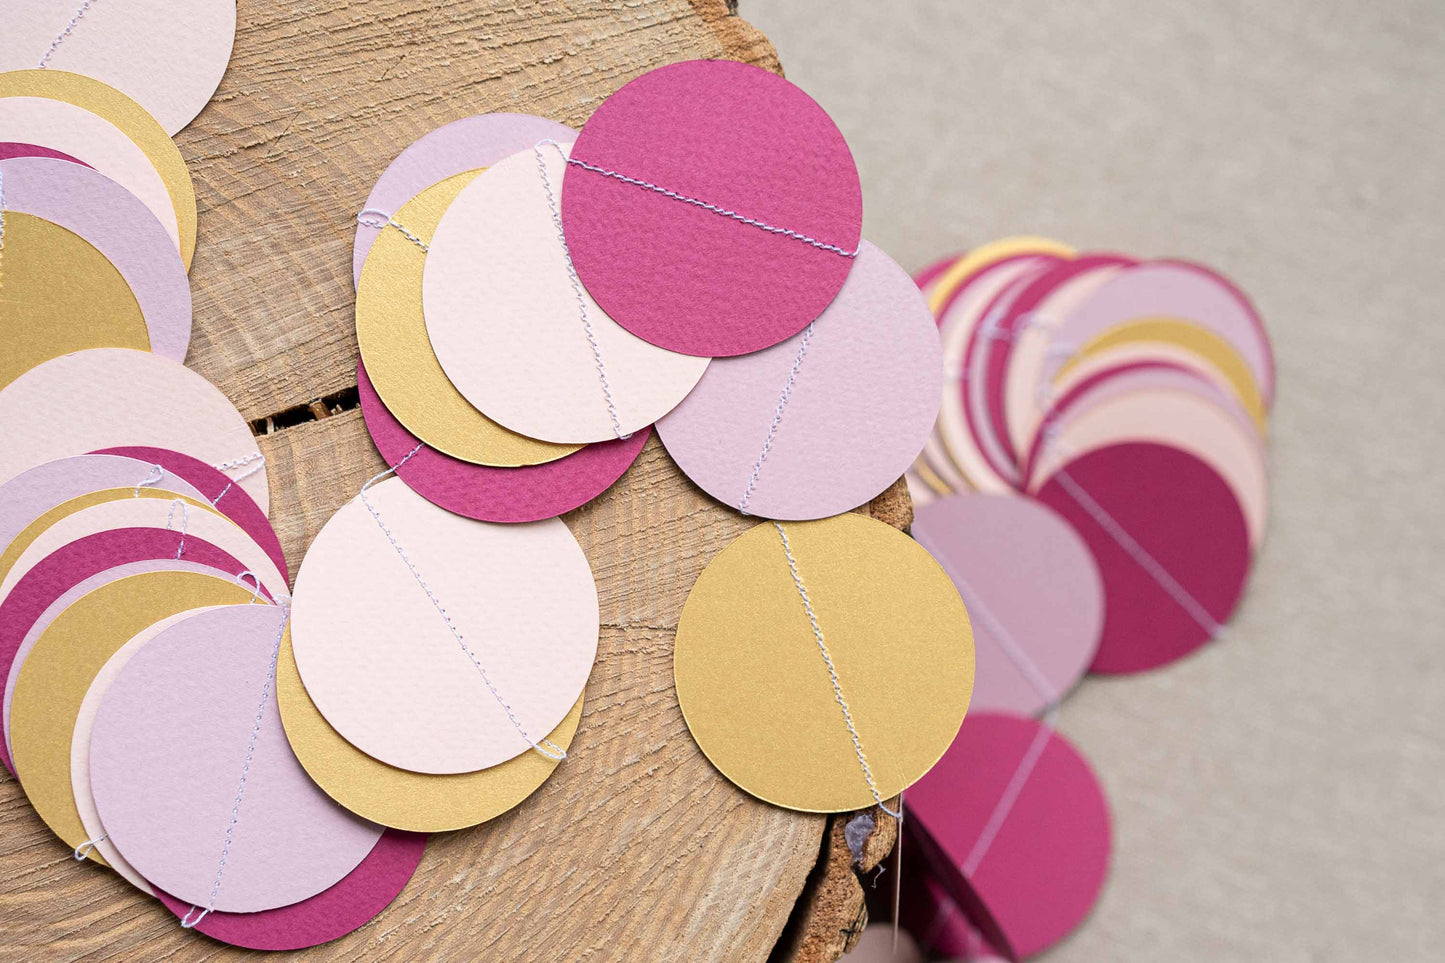 Rainbow Rose Gold and Berry Paper Garland